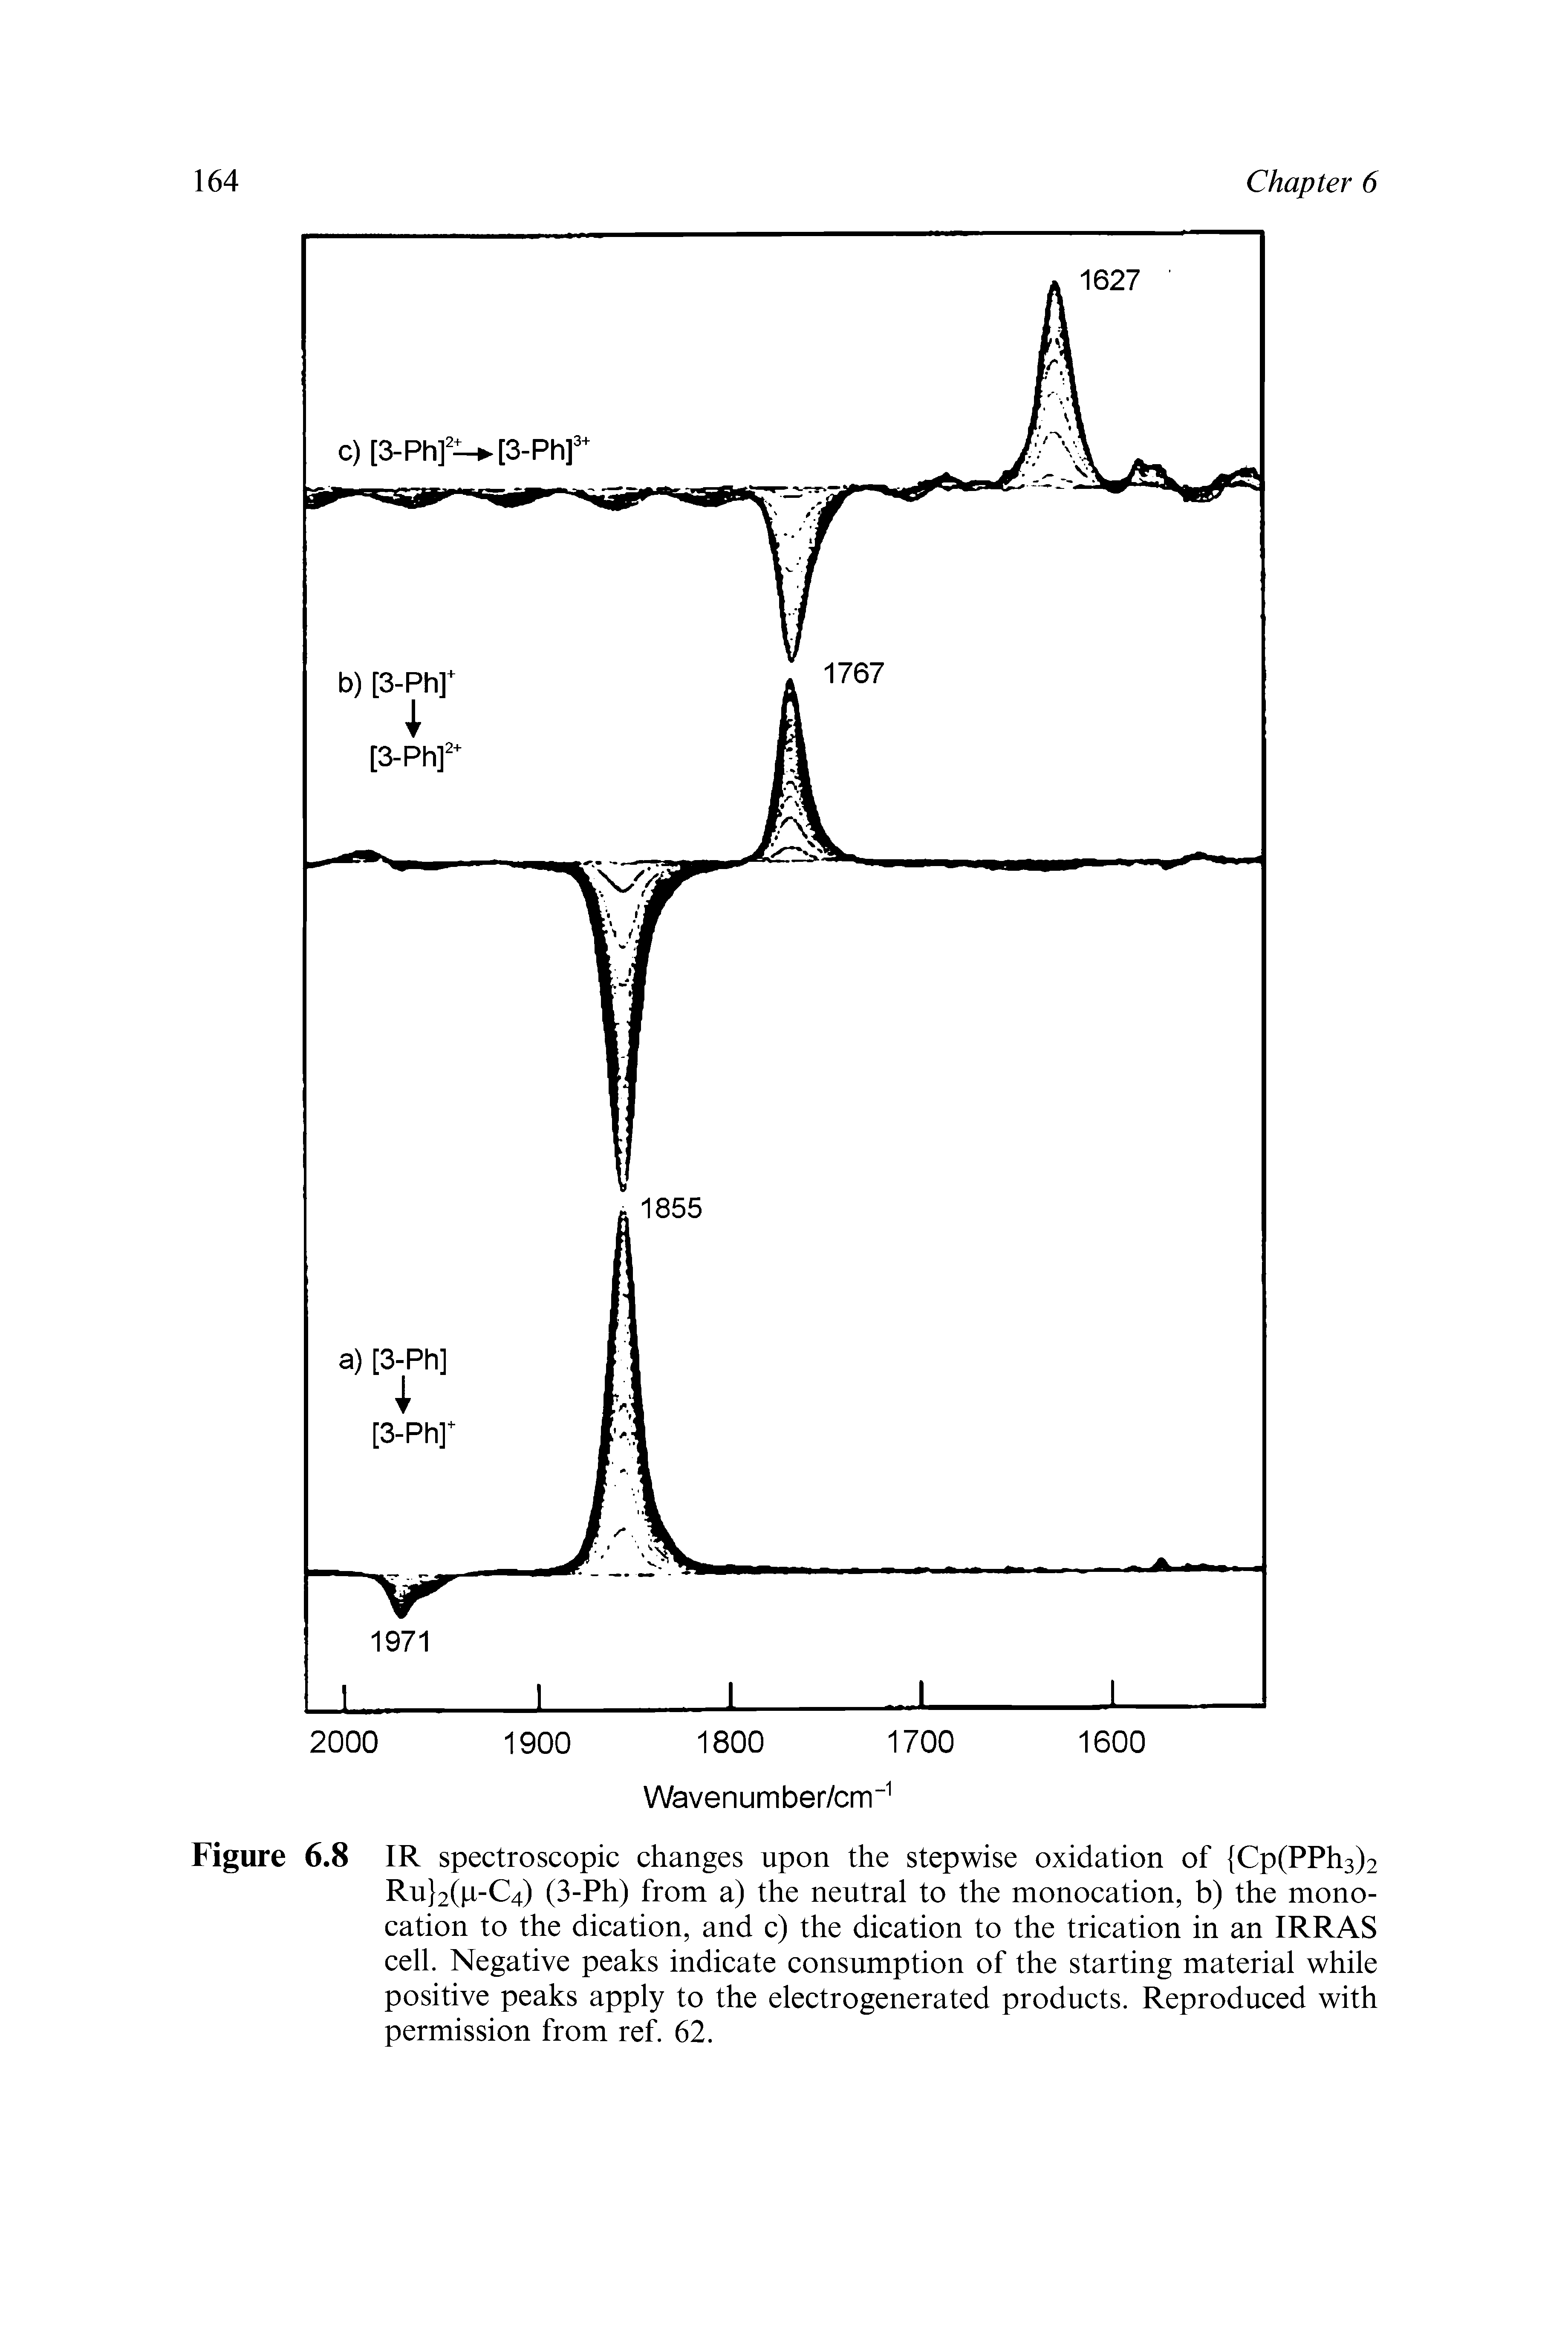 Figure 6.8 IR spectroscopic changes upon the stepwise oxidation of Cp(PPh3)2 Ru 2(ii-C4) (3-Ph) from a) the neutral to the monocation, b) the monocation to the dication, and c) the dication to the trication in an IRRAS cell. Negative peaks indicate consumption of the starting material while positive peaks apply to the electrogenerated products. Reproduced with permission from ref. 62.